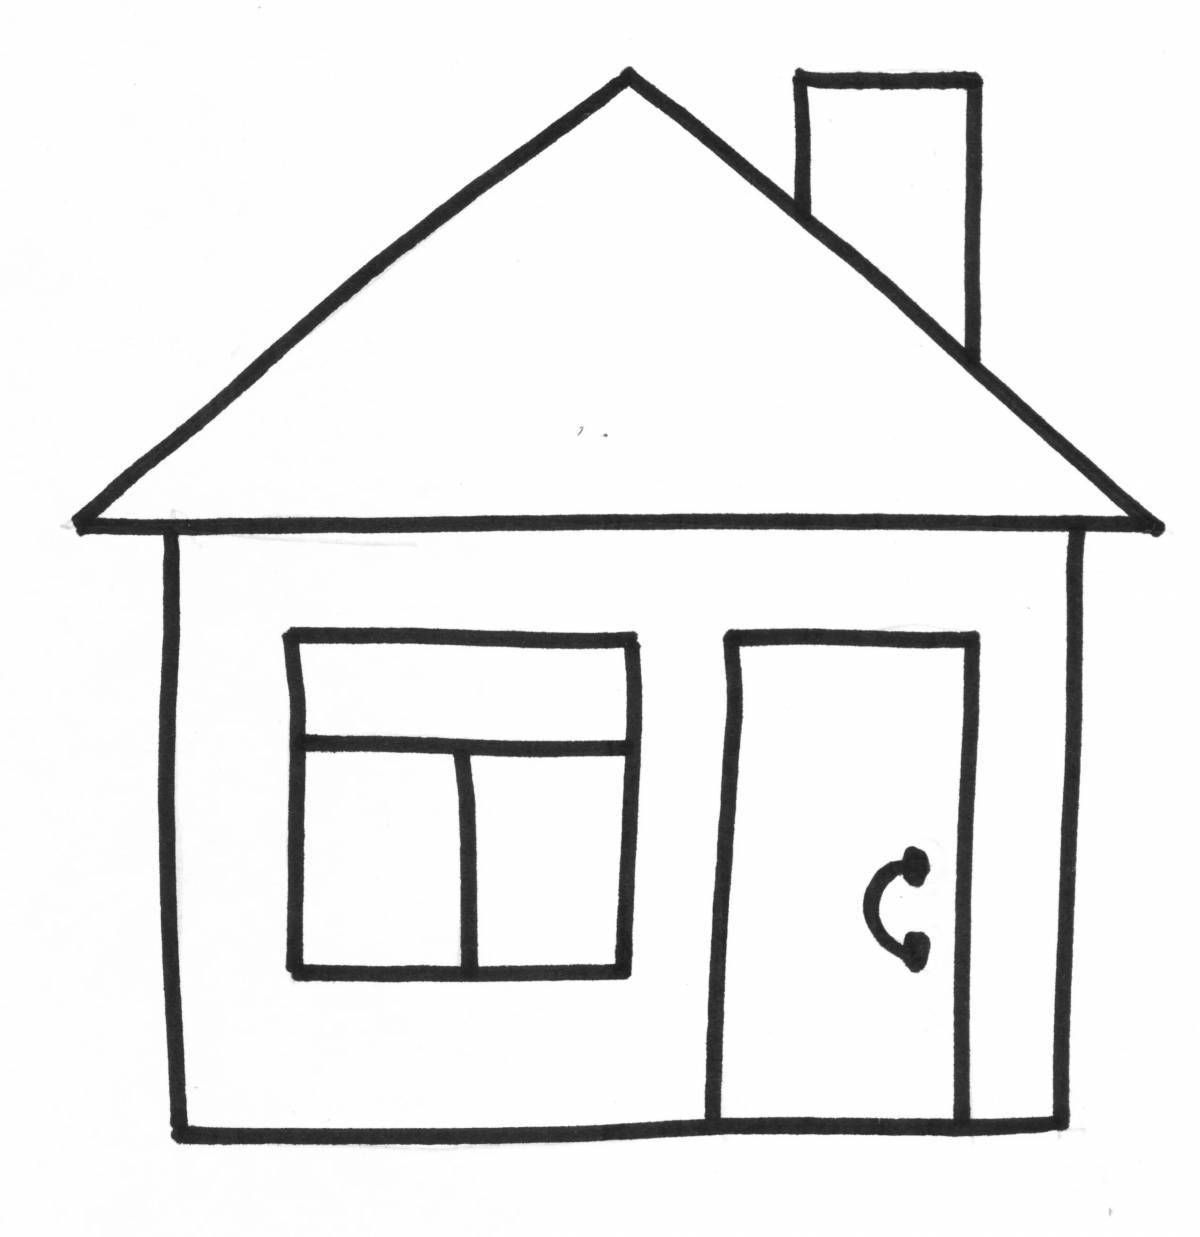 Fun house coloring book for 3-4 year olds